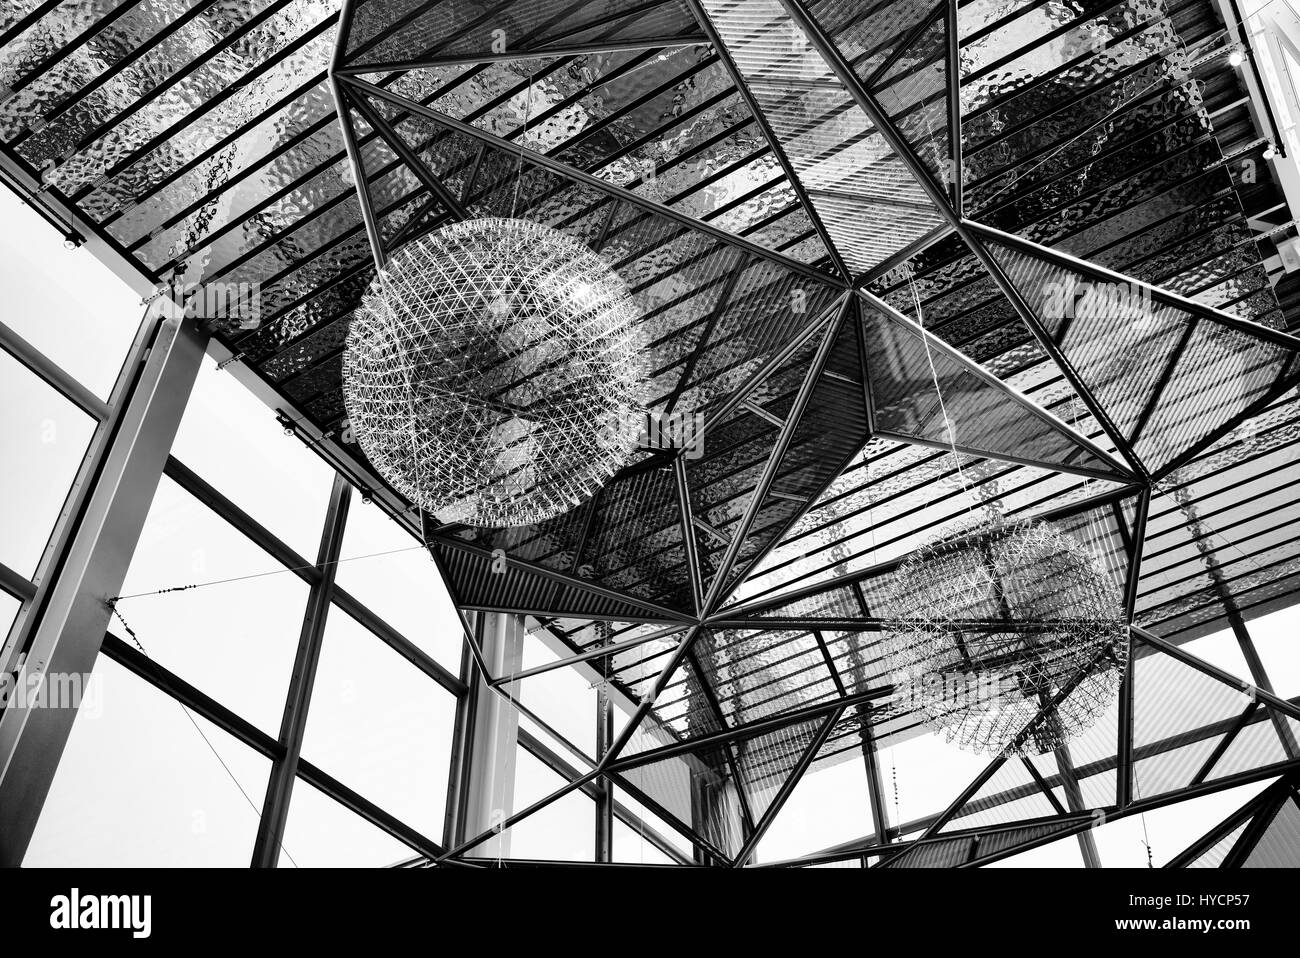 Malin Architectural Expanded Metal Kite sculptures at Centre MK, Milton Keynes Shopping Centre. Buckinghamshire, England. Black and white Stock Photo